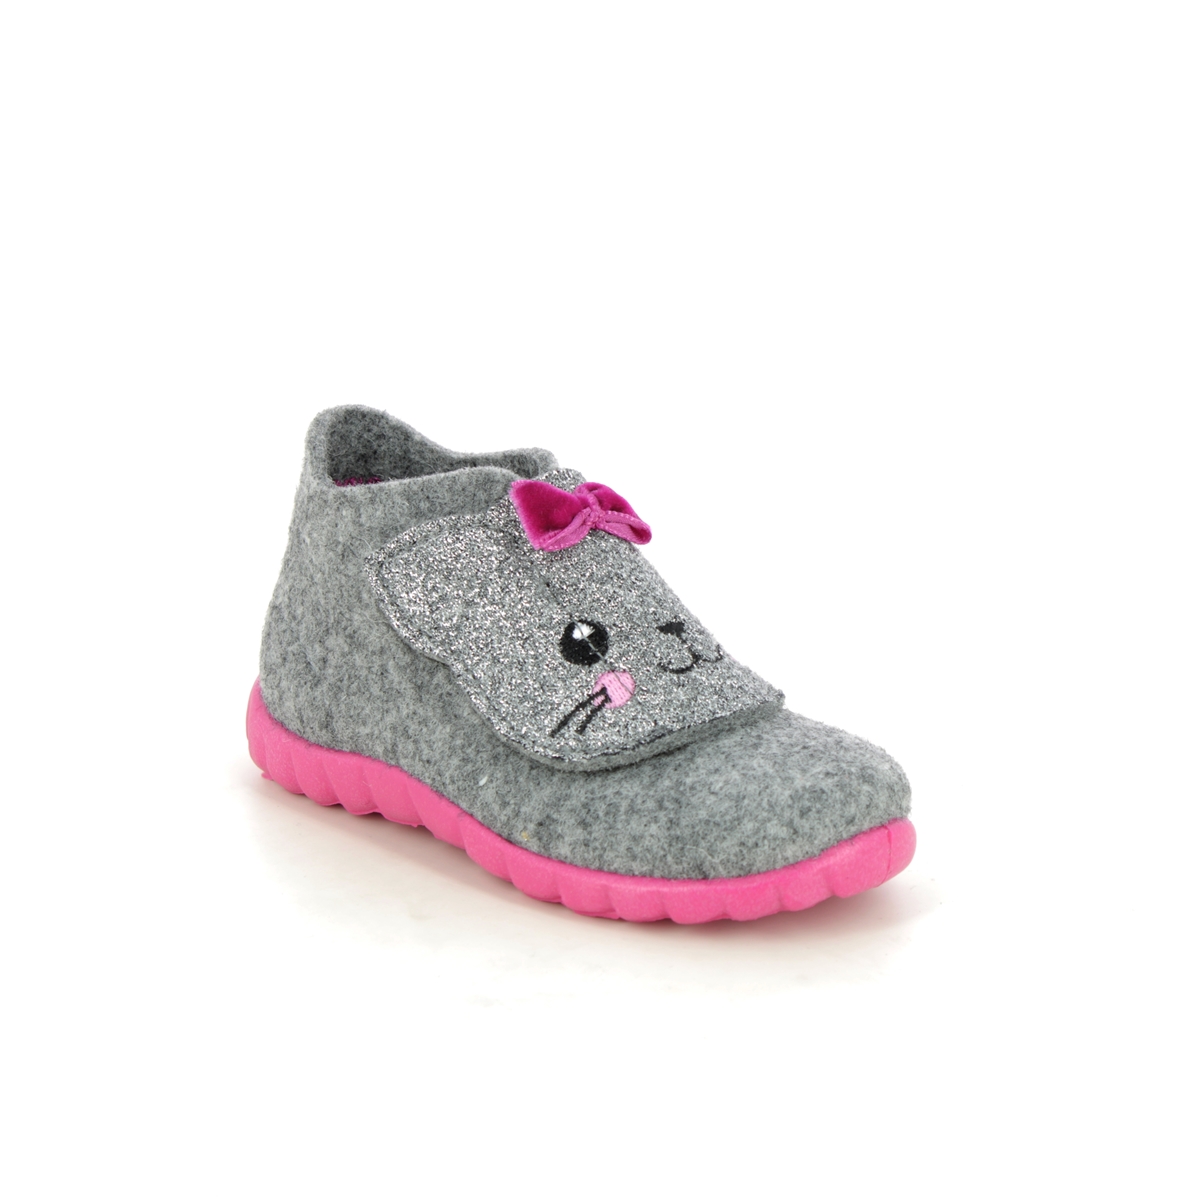 Superfit Happy Cat Grey Pink Kids slippers 0800295-2500 in a Plain  in Size 25